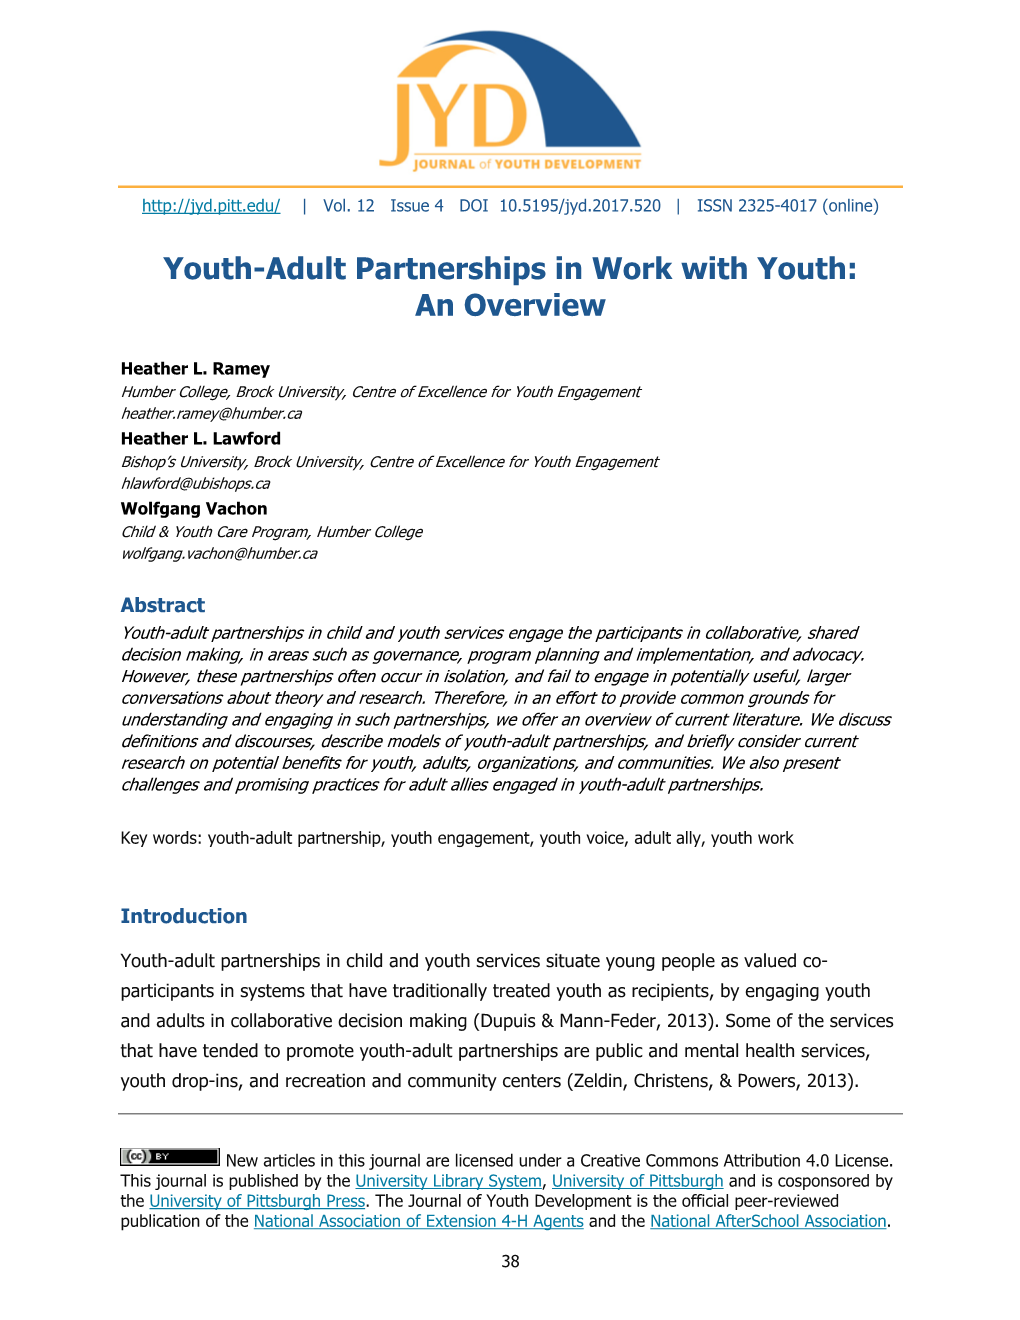 Youth-Adult Partnerships in Work with Youth: an Overview